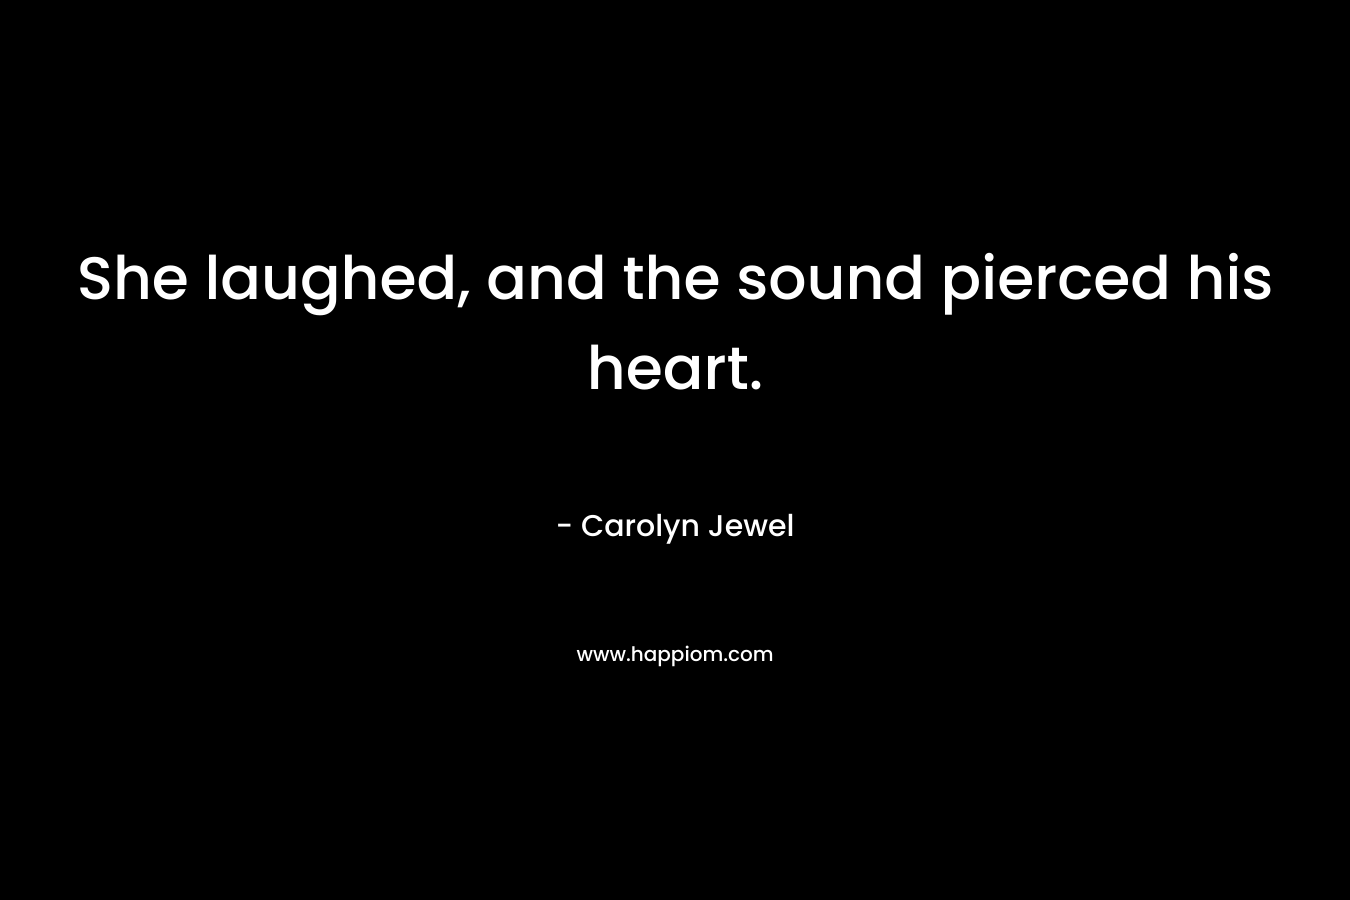 She laughed, and the sound pierced his heart.